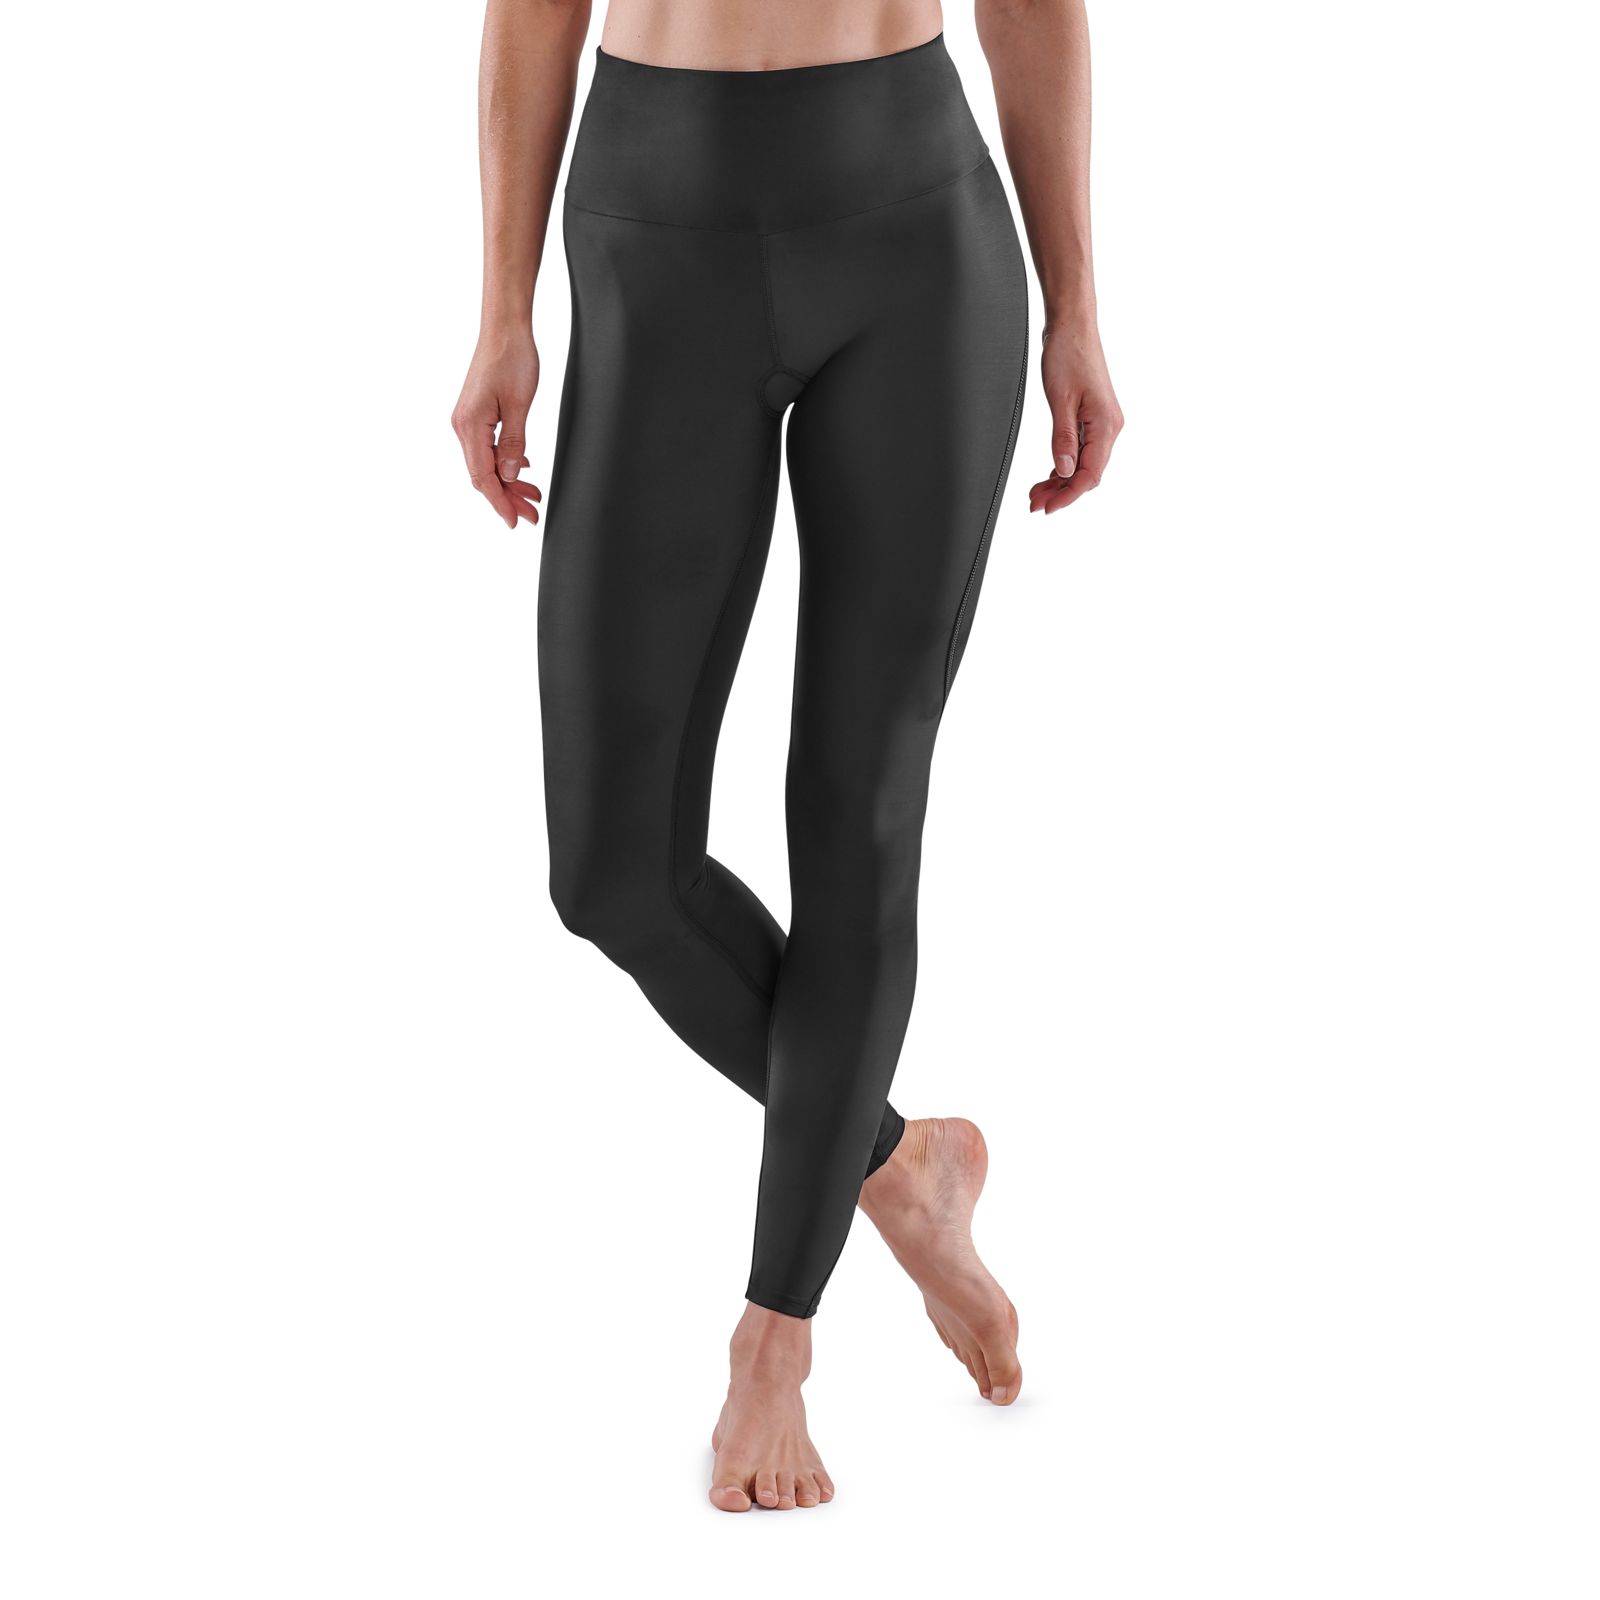 Skins Compression Women's Skins Series-3 Travel And Recovery Long Tights